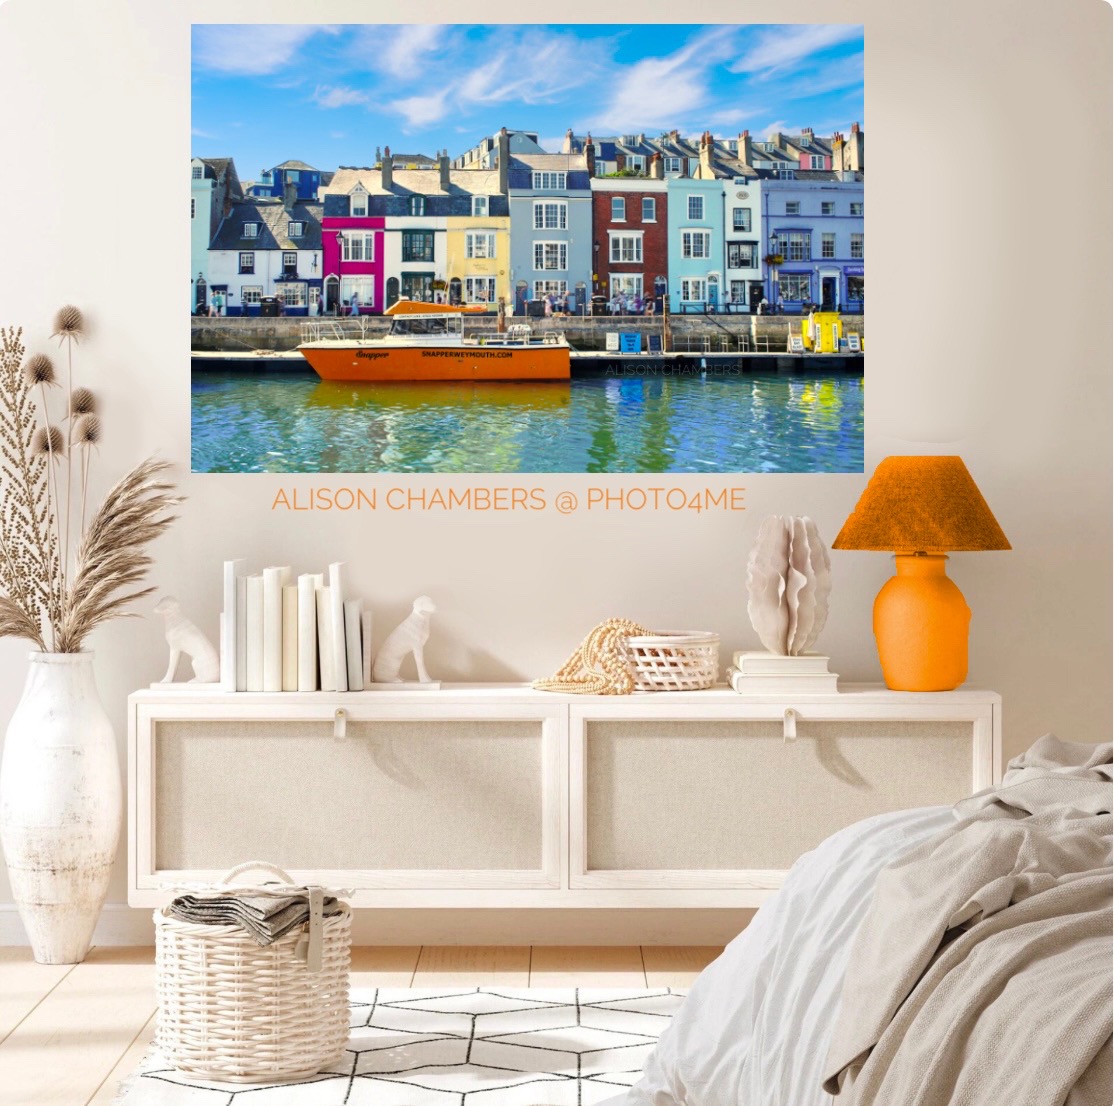 Weymouth Snapper Boat©️. Available from; shop.Photo4Me.com/1282944 & alisonchambers2.redbubble.com & 2-alison-chambers.pixels.com #weymouth #weymouthdorset #weymouthbeach #weymouthharbour #dorsetcoast